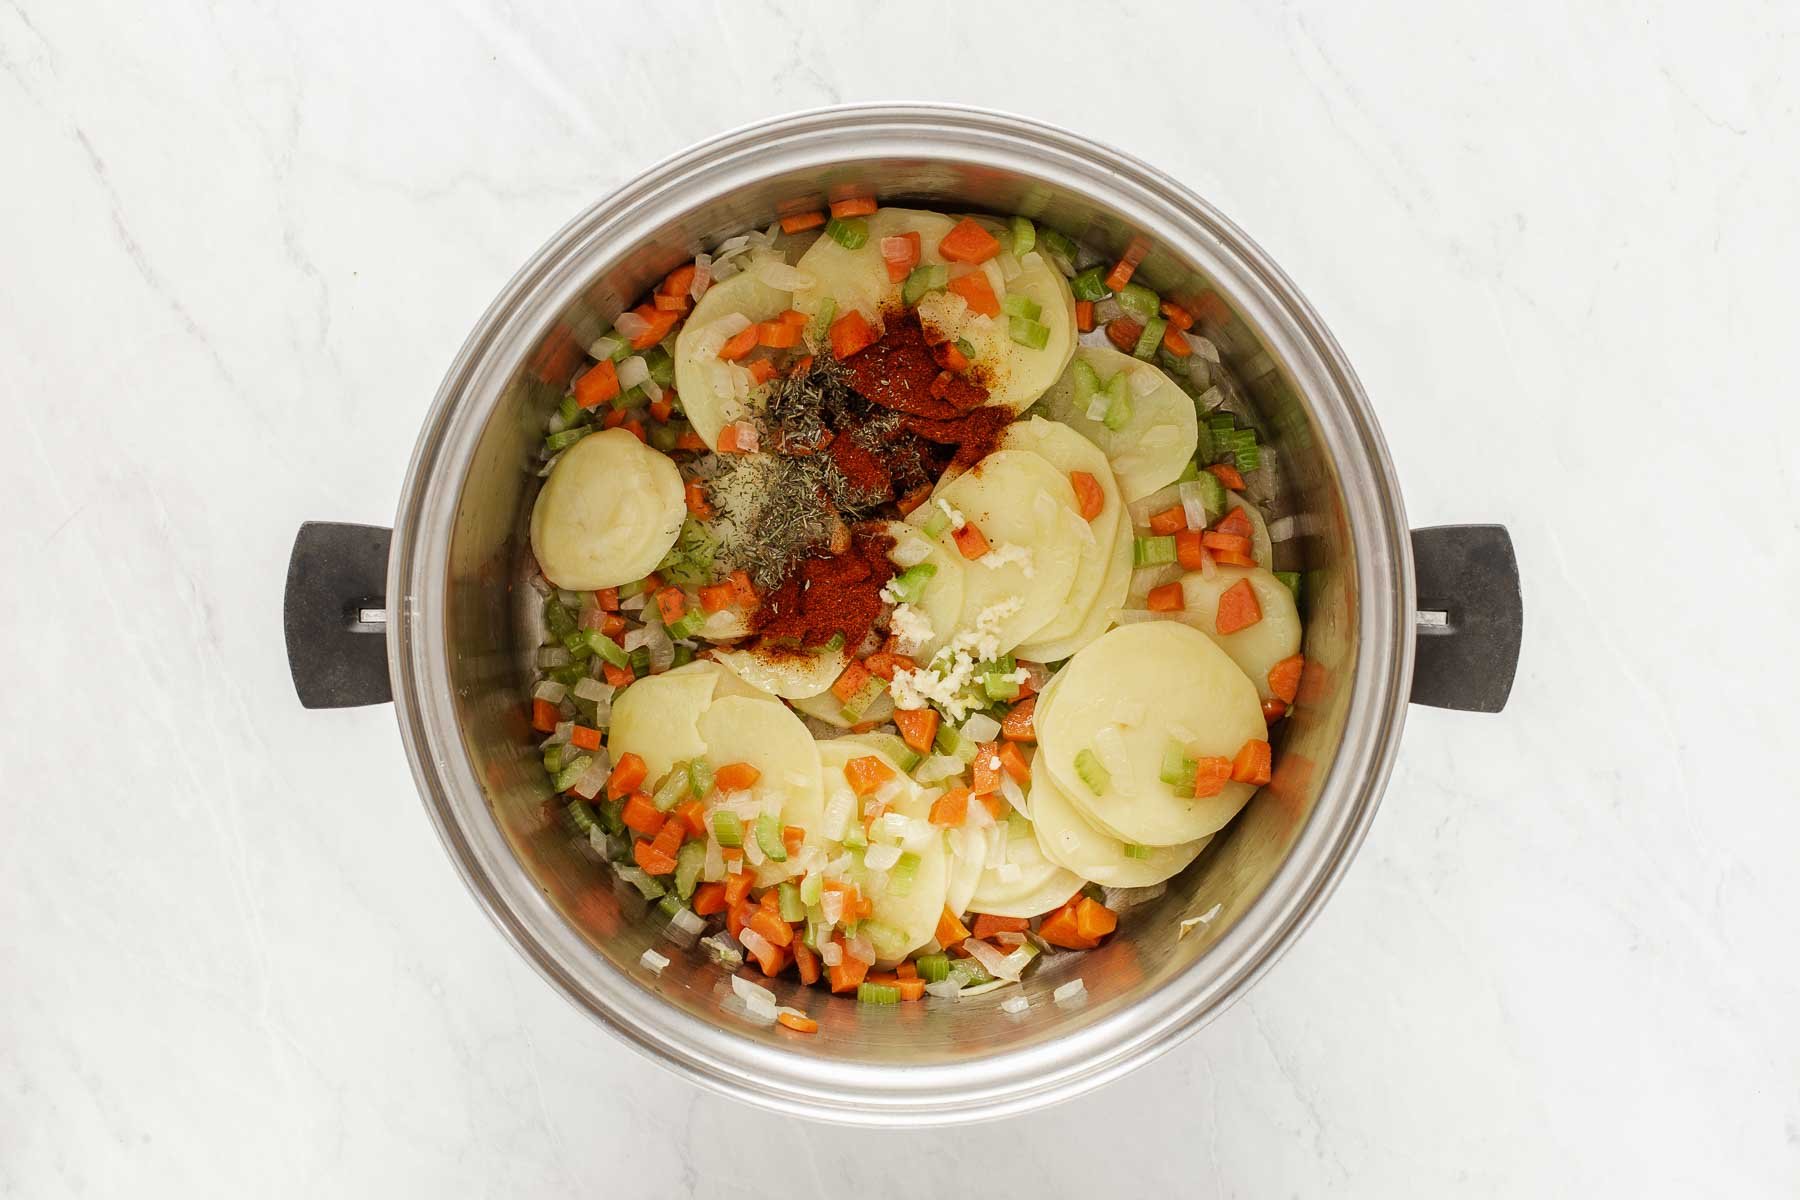 Stockpot with sliced potatoes, vegetables and spices.